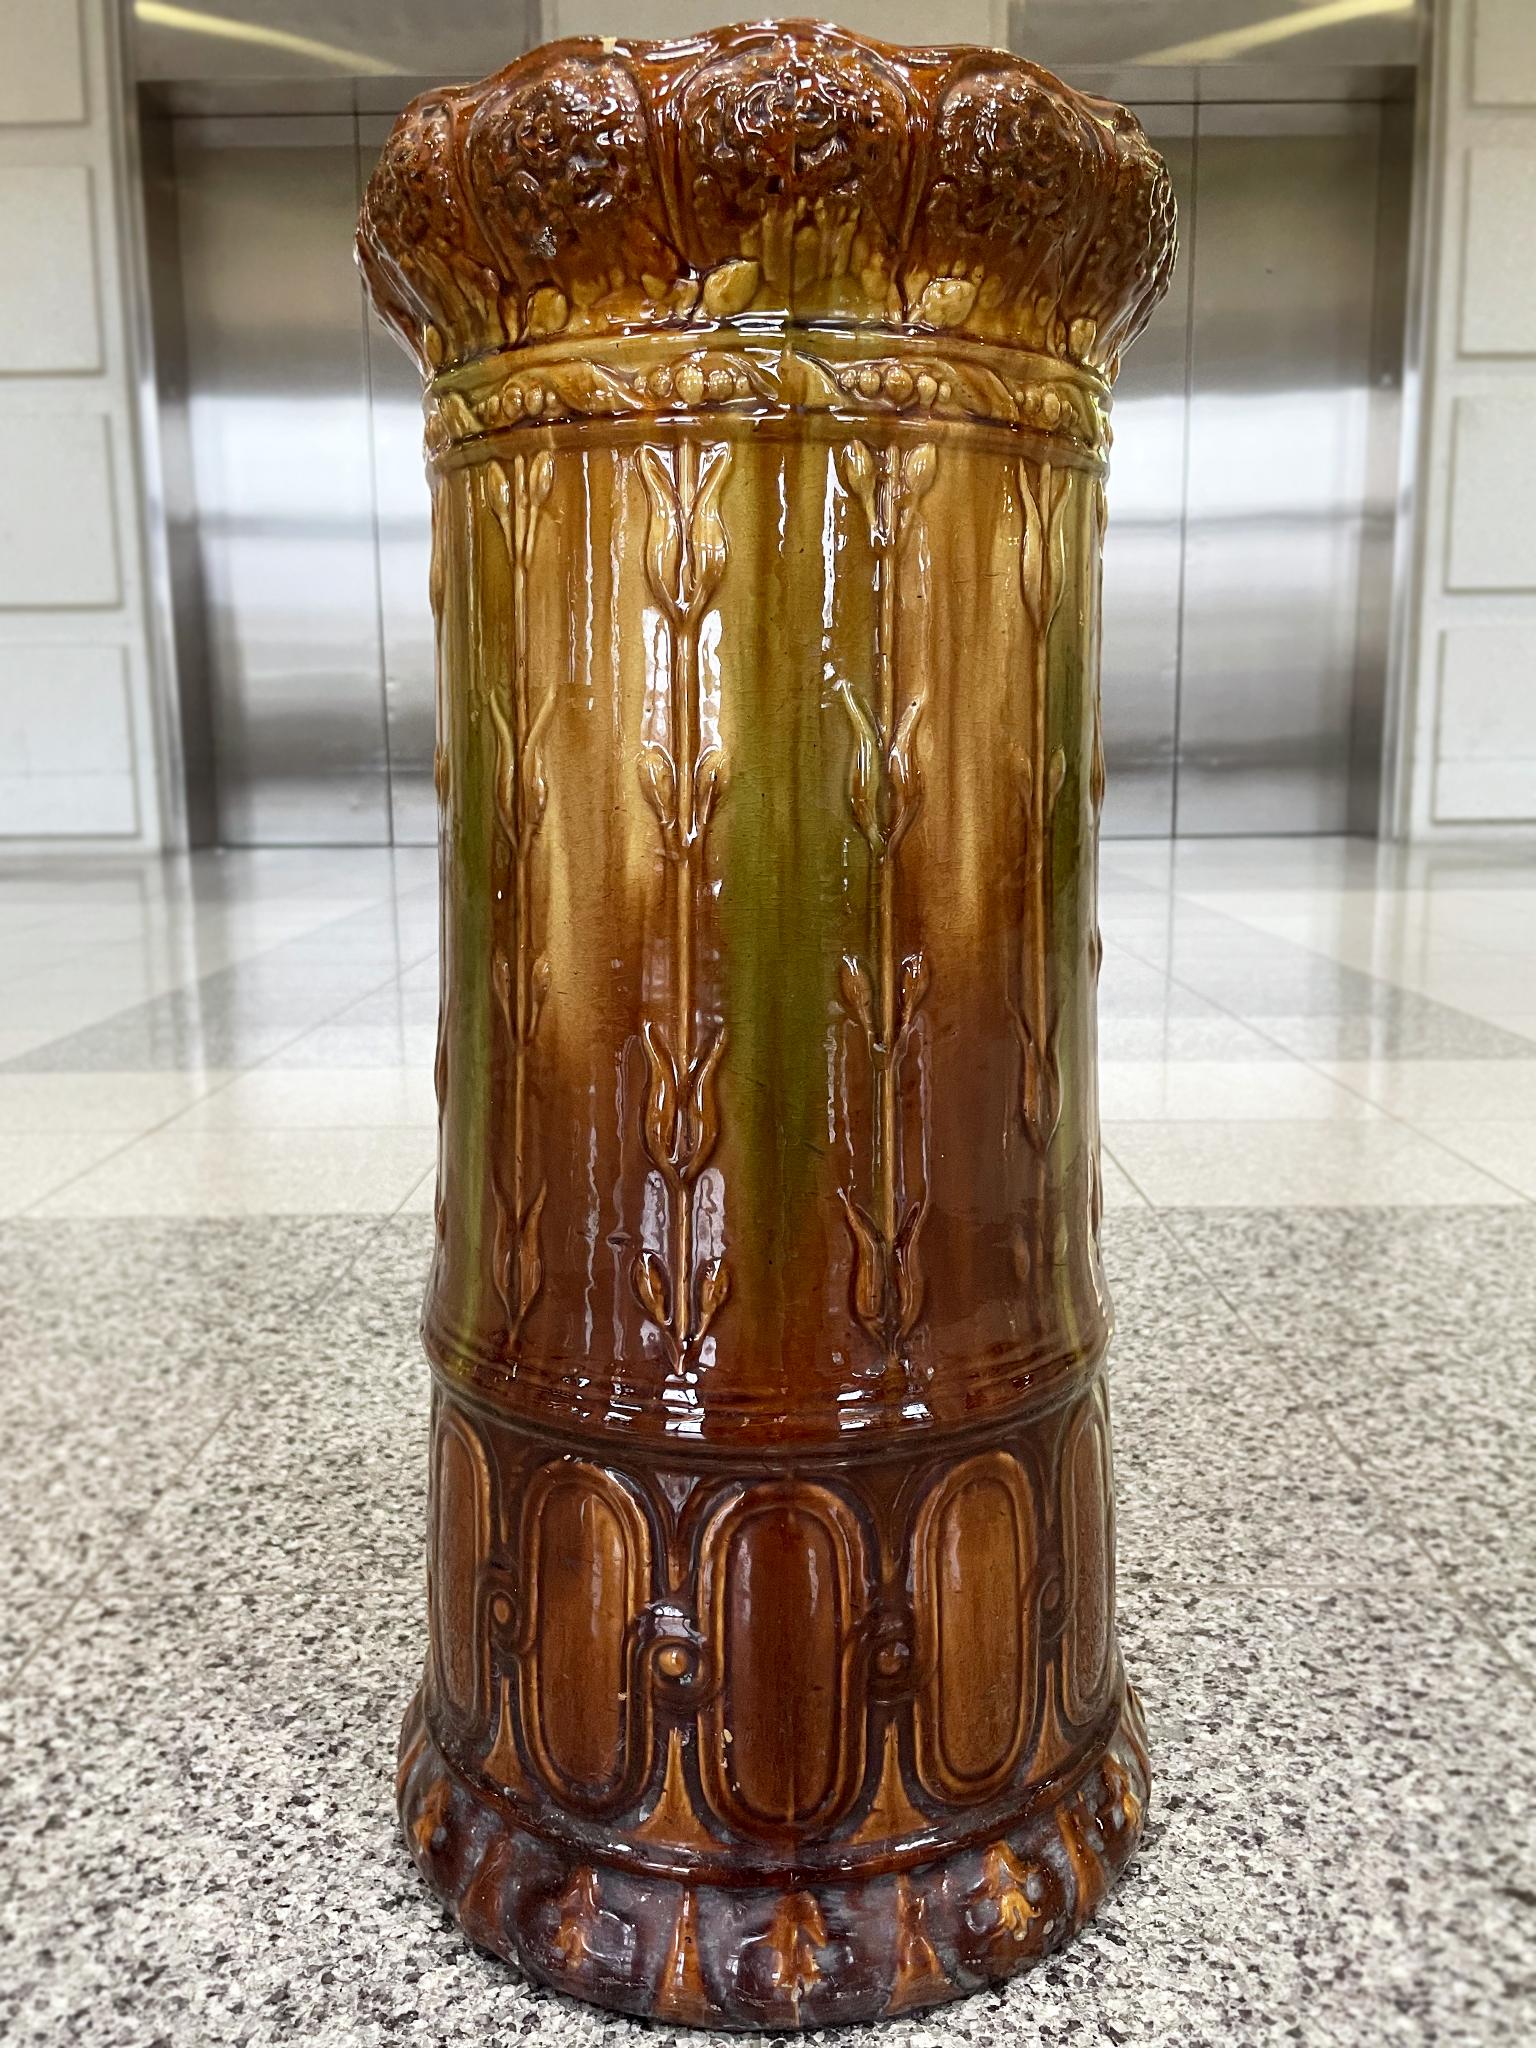 A ceramic umbrella stand made by Weller Pottery in the early 20th century. It's remarkable for its beautiful glazing with craquelure and gradations of color that go from ocher yellow to burnt umber hues. The shape makes use of floral motifs that